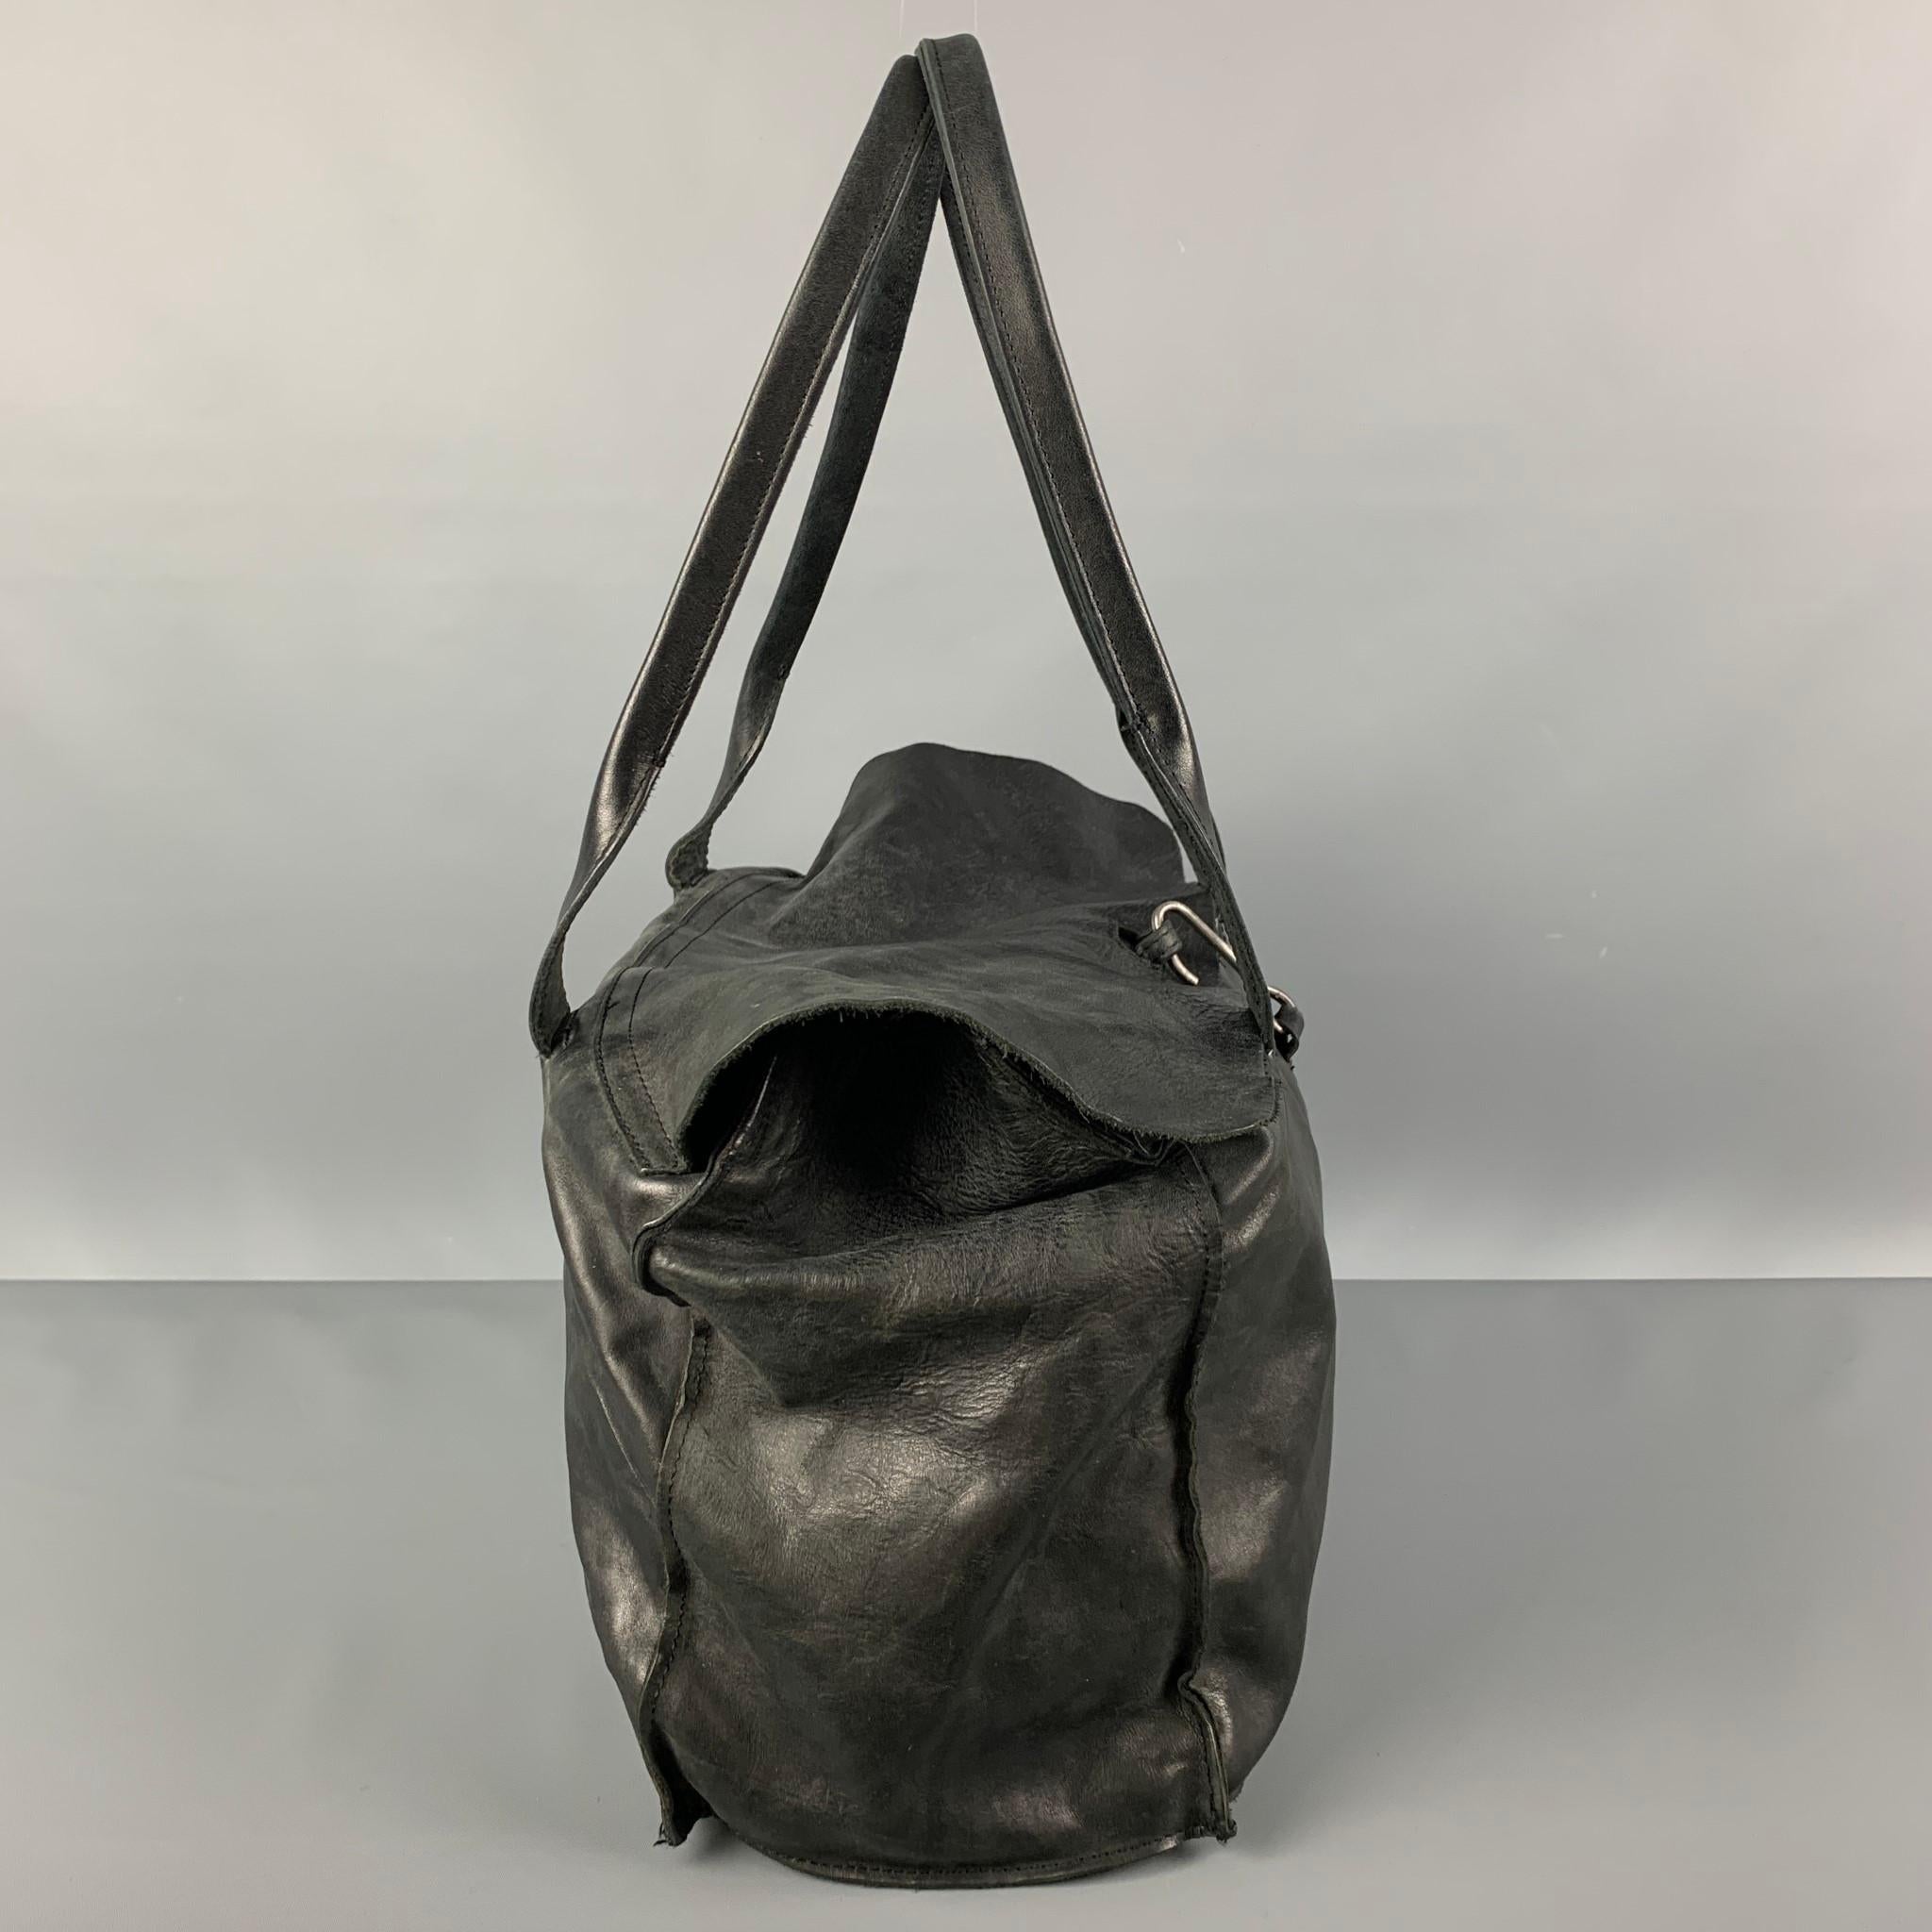 TAGLIOVIVO 'Doctor' bag comes in a black horsehide leather featuring top handles, inner pocket, linen lining, and a hook & eye closure. Made in Italy.

Very Good Pre-Owned Condition.
Original Retail Price: $1,040.00

Measurements:

Length: 15.5